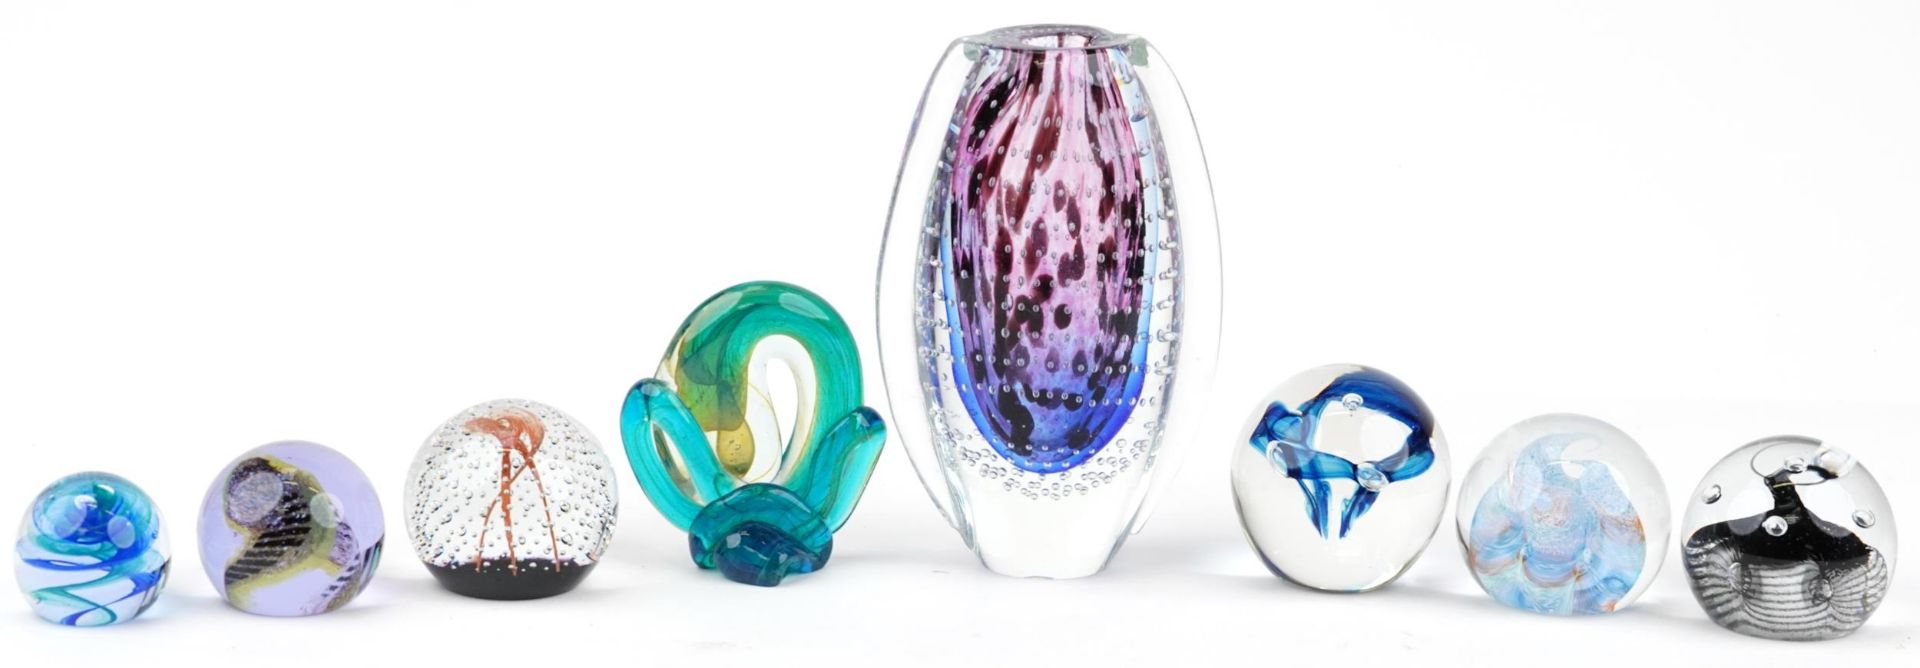 Art glassware including Murano style twin handled vase with controlled bubbles and Caithness